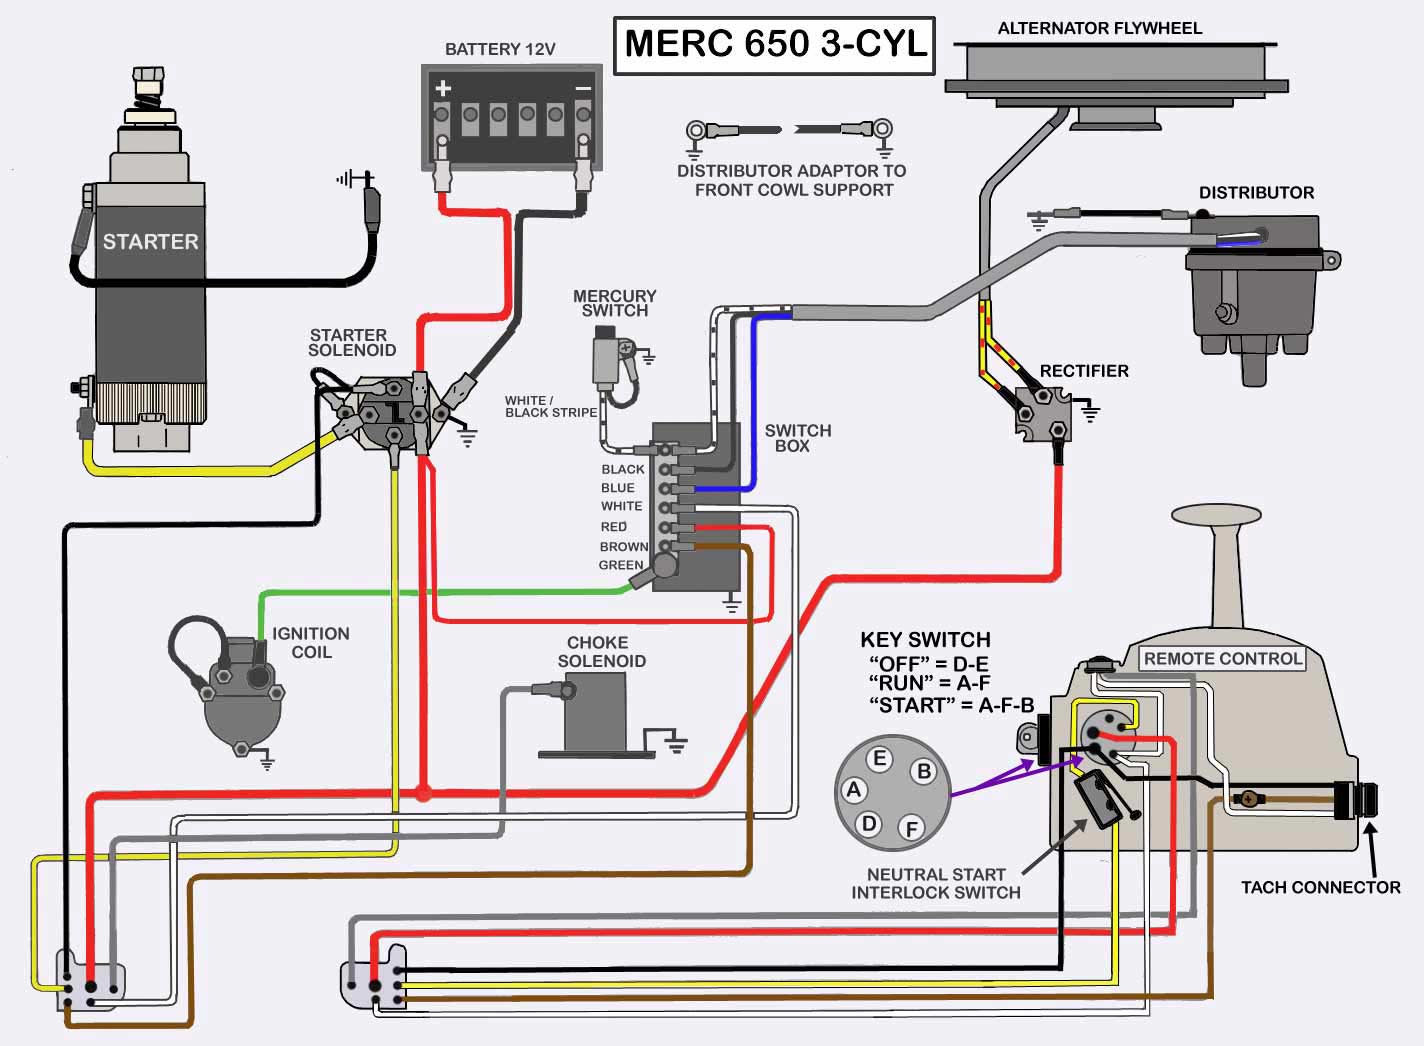 Starter Solenoid Wiring Diagram For A 86 Mercury Force 40 Horsepower Outboard Motor from www.maxrules.com